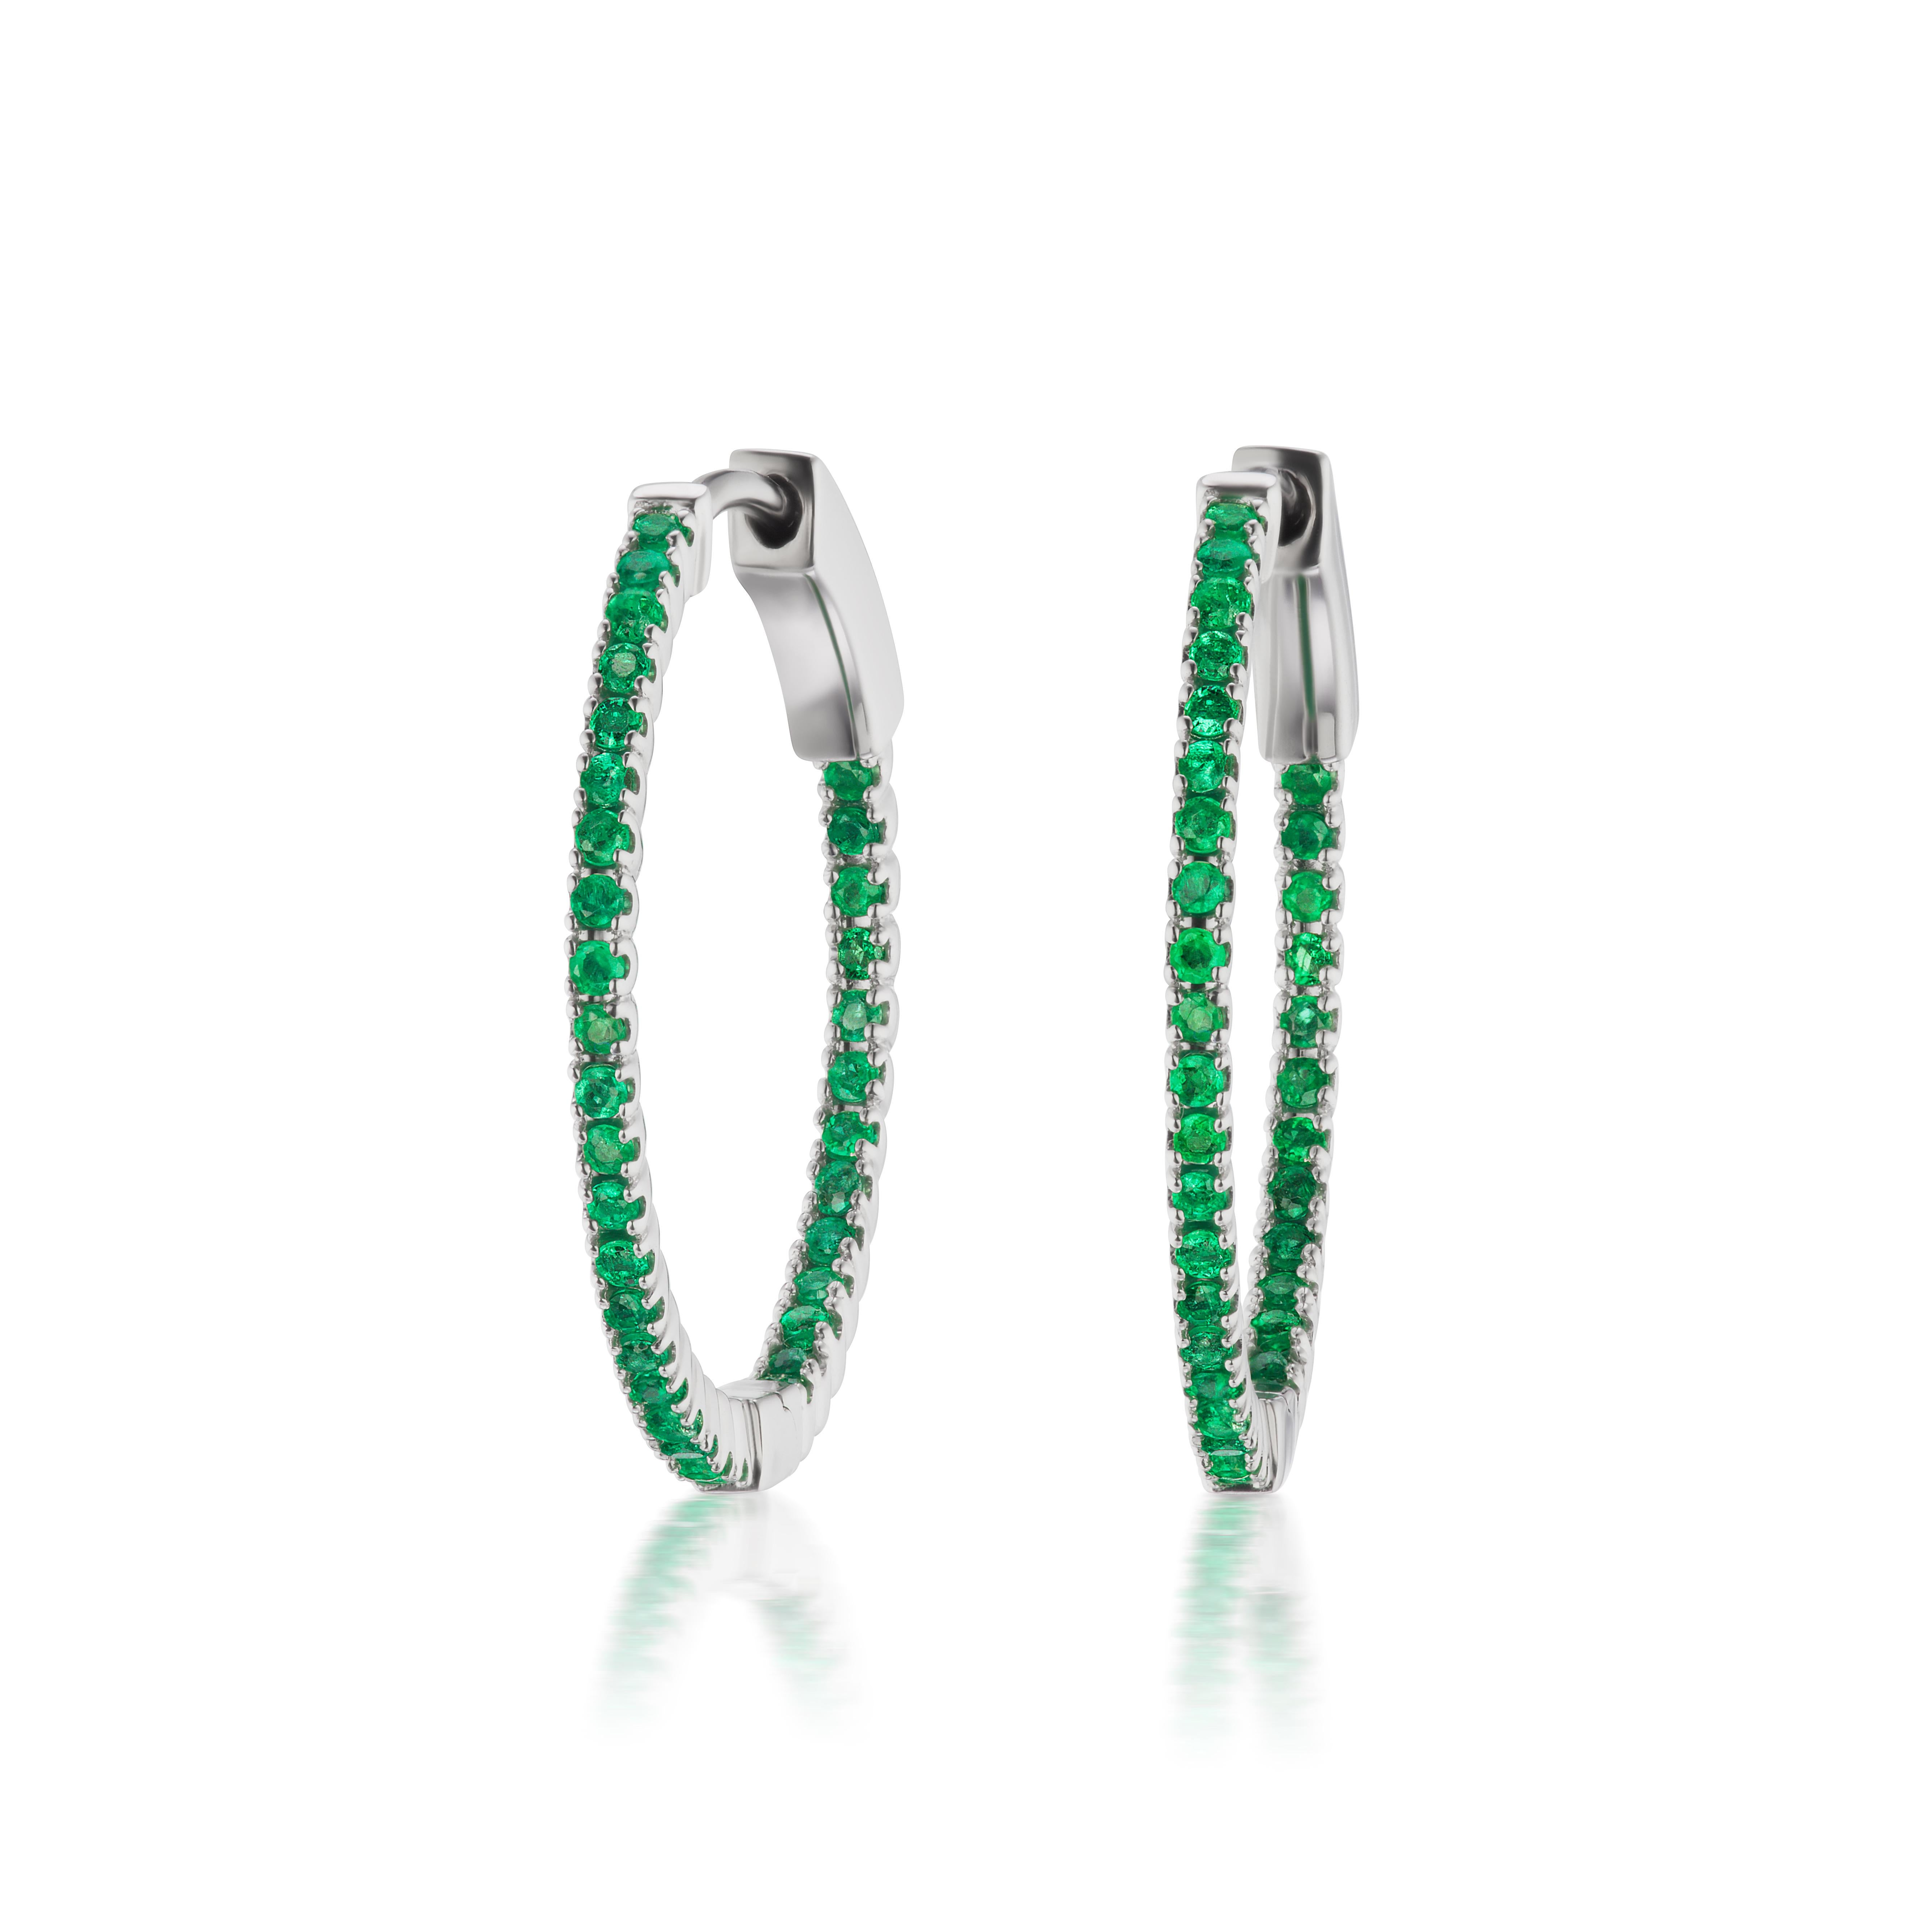 These Gemistry hoop earrings have the distinctive green glimmer of the emerald. Gleaming from the inside and outside, 0.48 ct. t.w. emerald rounds illuminate the polished 18k white gold hoops. 
Hanging length is 3/4”.
Please follow the Luxury Jewels